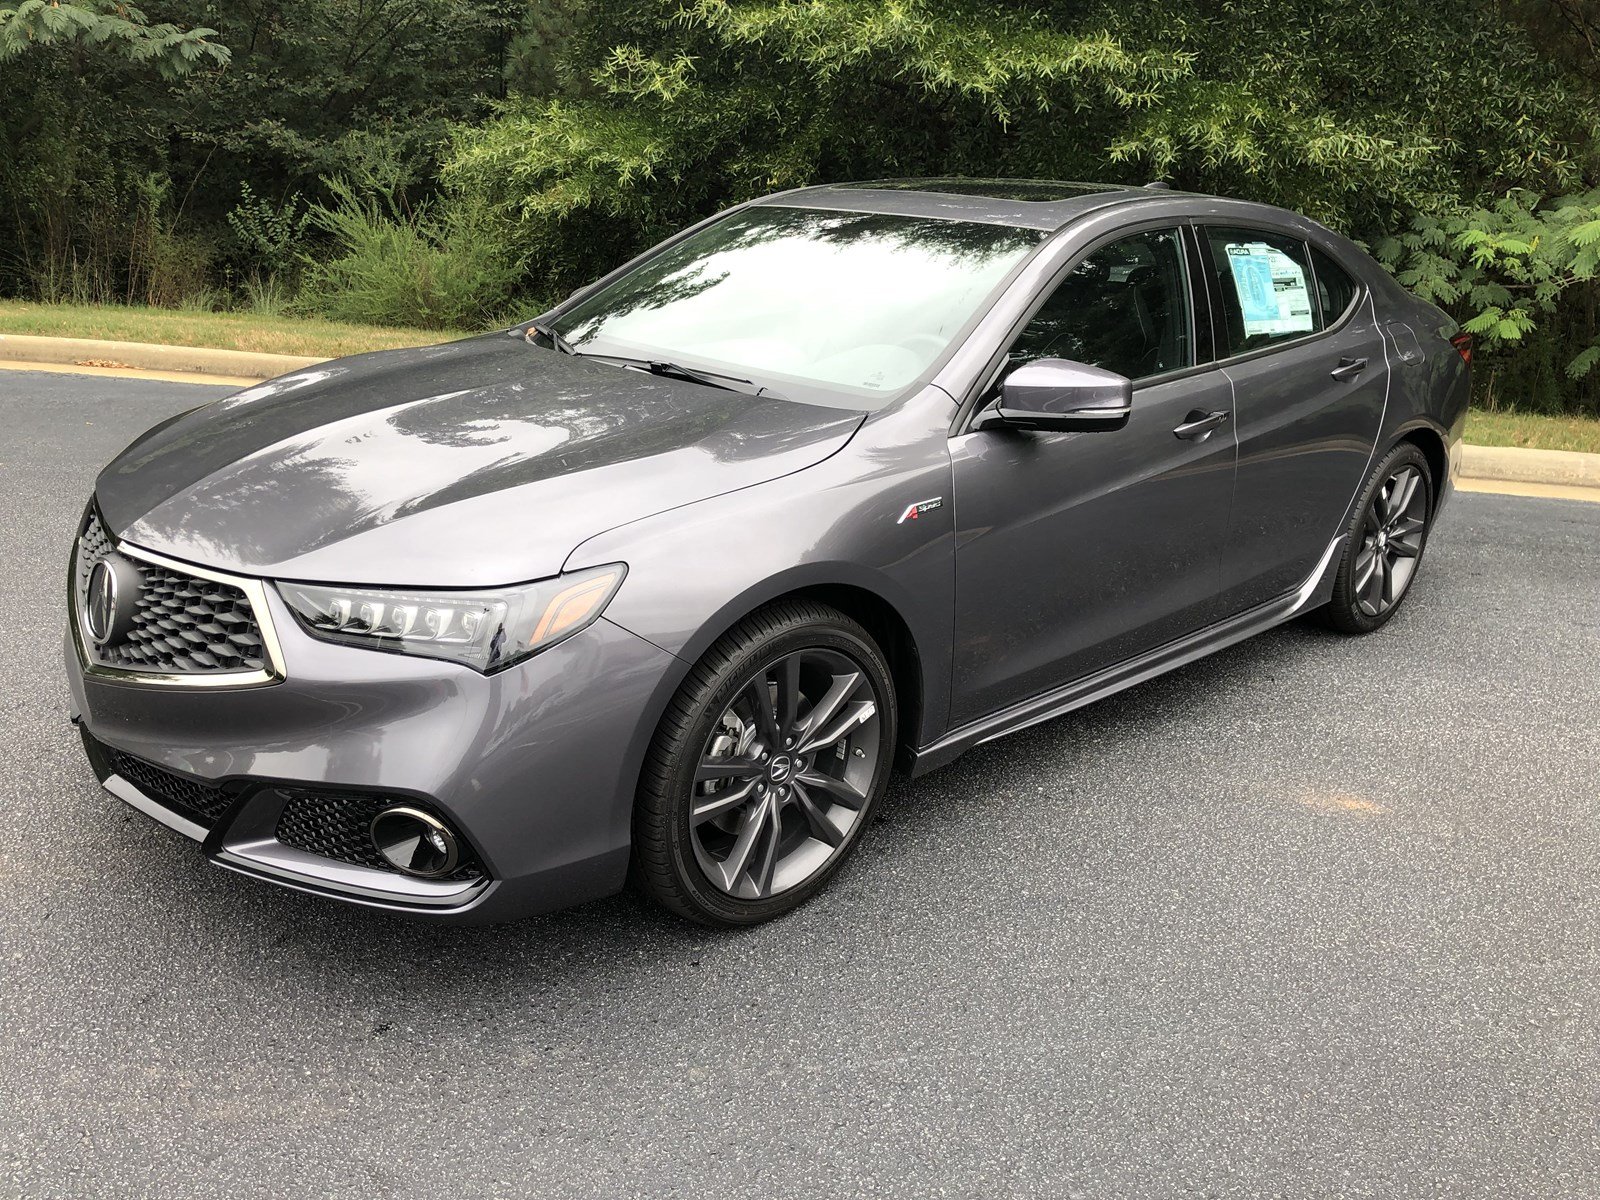 New 2019 Acura Tlx 3 5l Technology Pkg W A Spec Pkg With Navigation